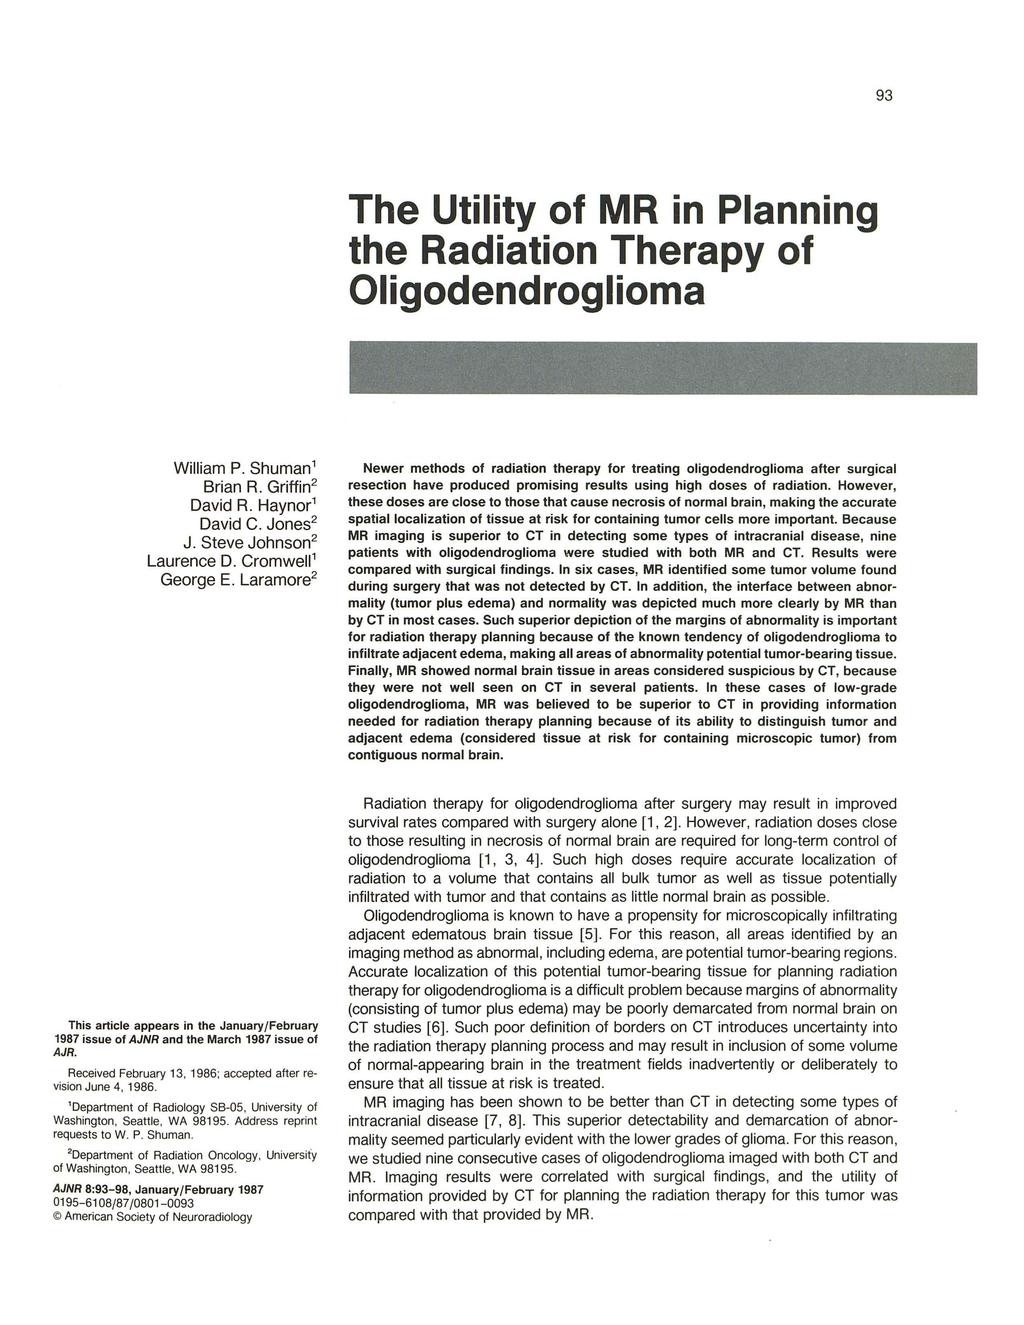 93 The Utility of MR in Planning the Radiation Therapy of Oligodendroglioma William P. Shuman' Brian R. Griffin2 David R. Haynor' David C. Jones 2 J. Steve Johnson 2 Laurence D. Cromwell' George E.